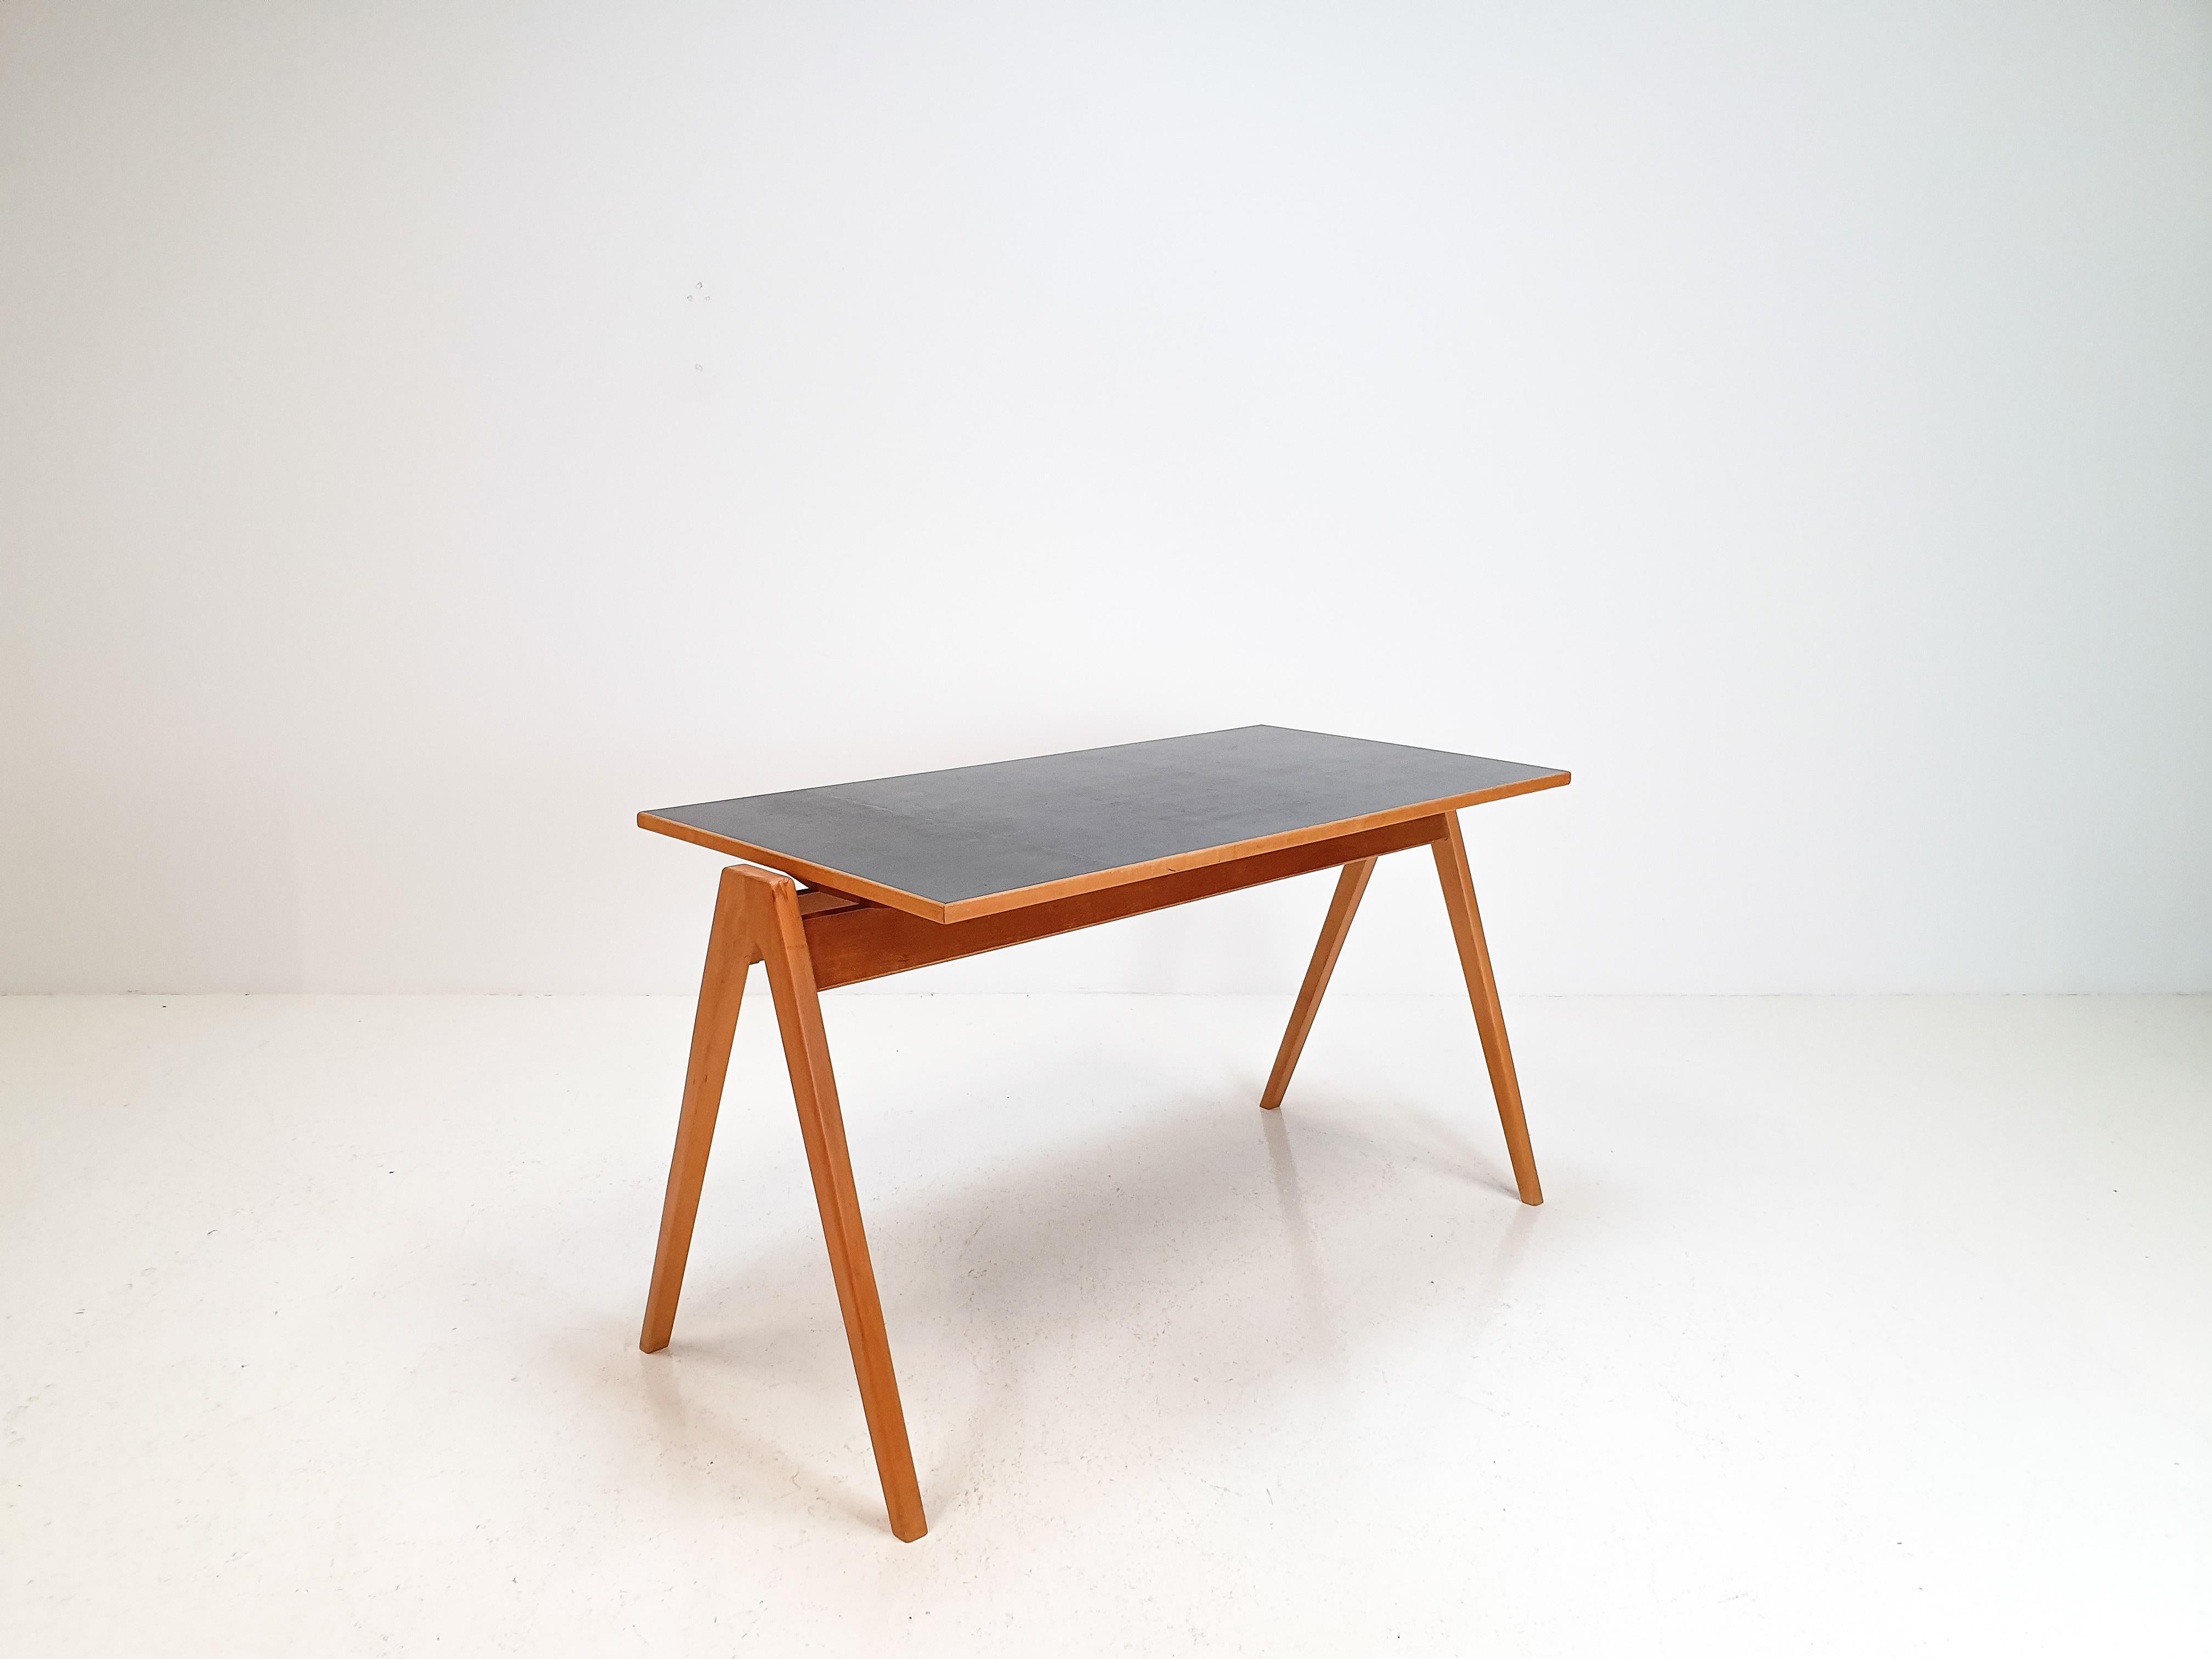 A modernist Hillestak table/desk by British Industrial designer Robin Day for Hille, 1950s

With inspiration drawn from Alvar Aalto & Eames, Robin Day’s Hillestak design catered for both domestic and commercial interiors.

The A-frame leg